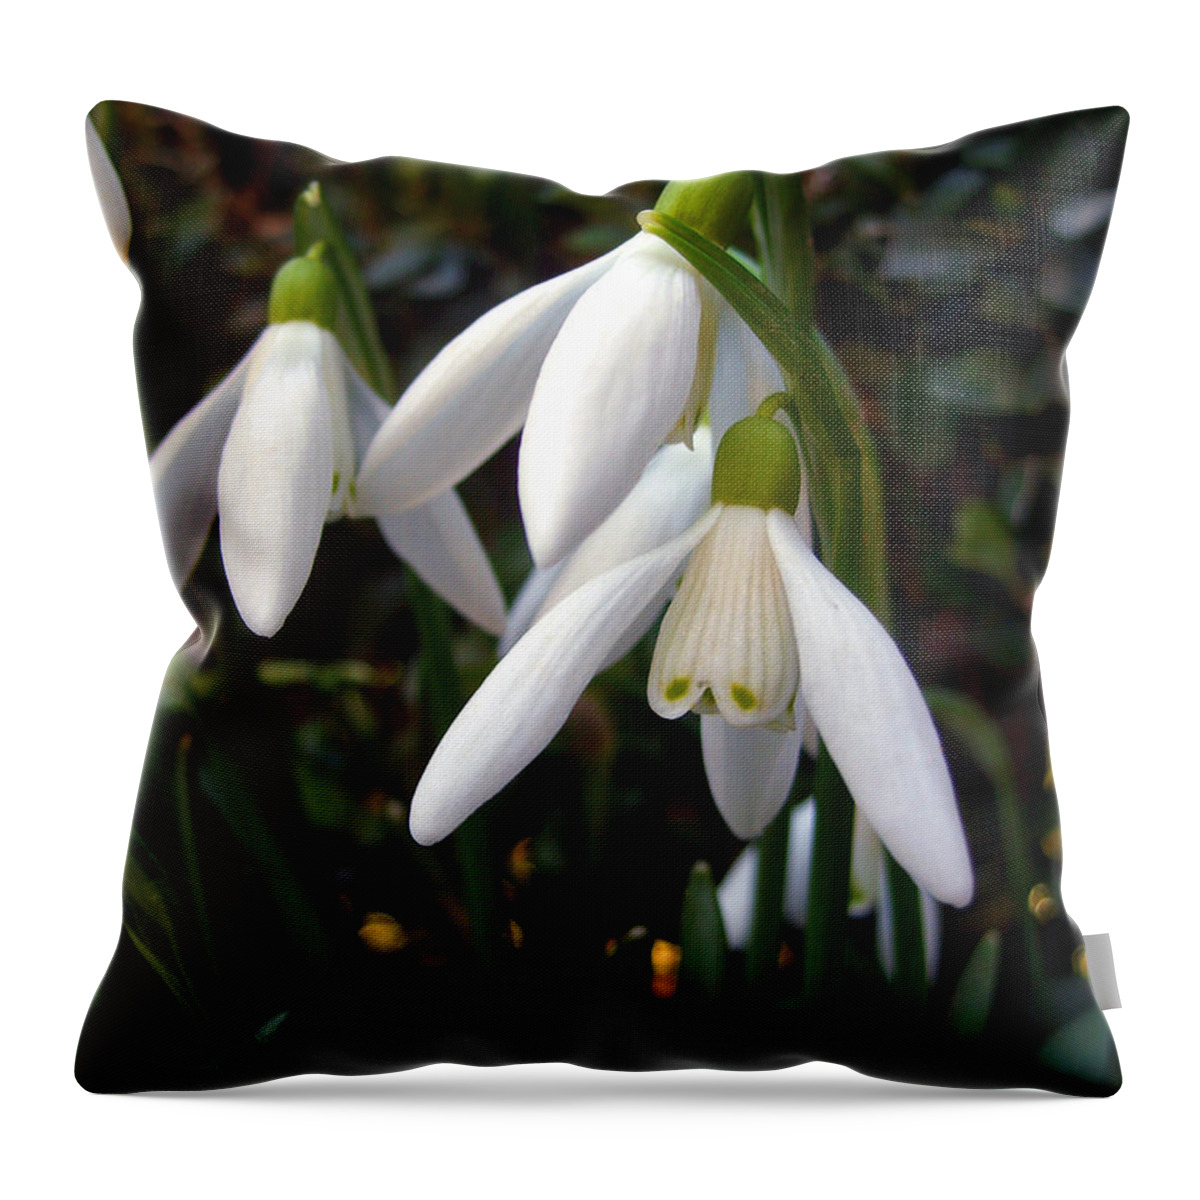 Snowdrops Throw Pillow featuring the photograph Snowdrops #2 by Nina Ficur Feenan